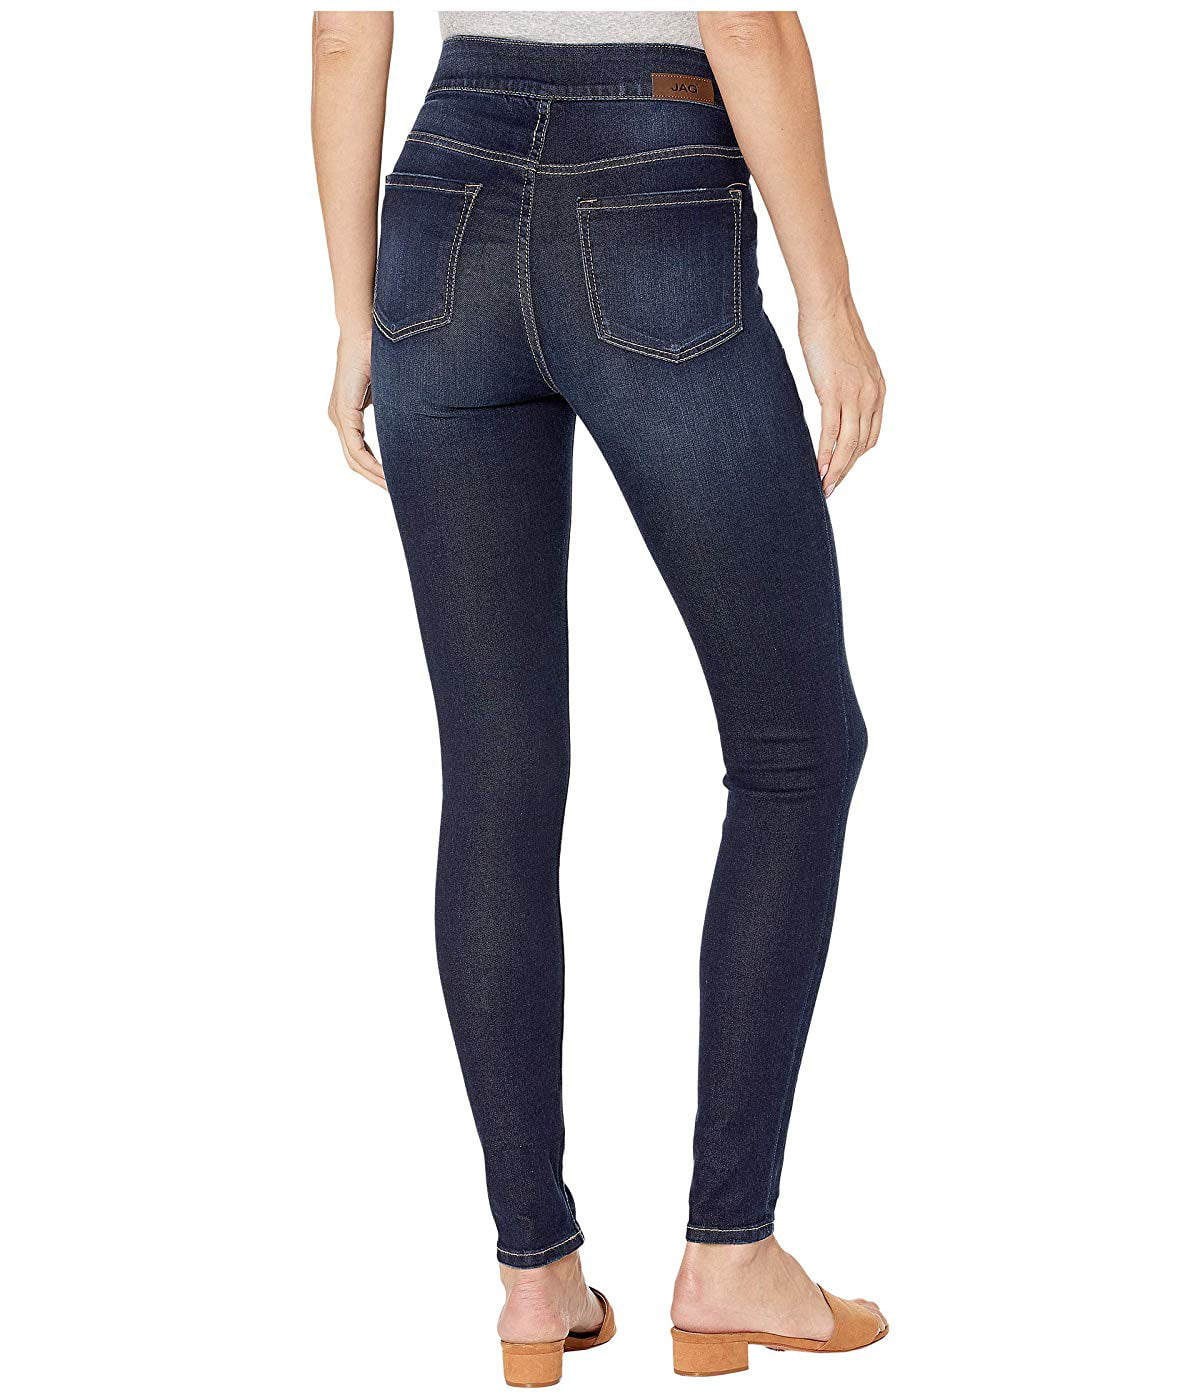 JAG Jeans - Jag Jeans Maya Skinny Pull-On Jeans in Deluxe Denim Baltic ...